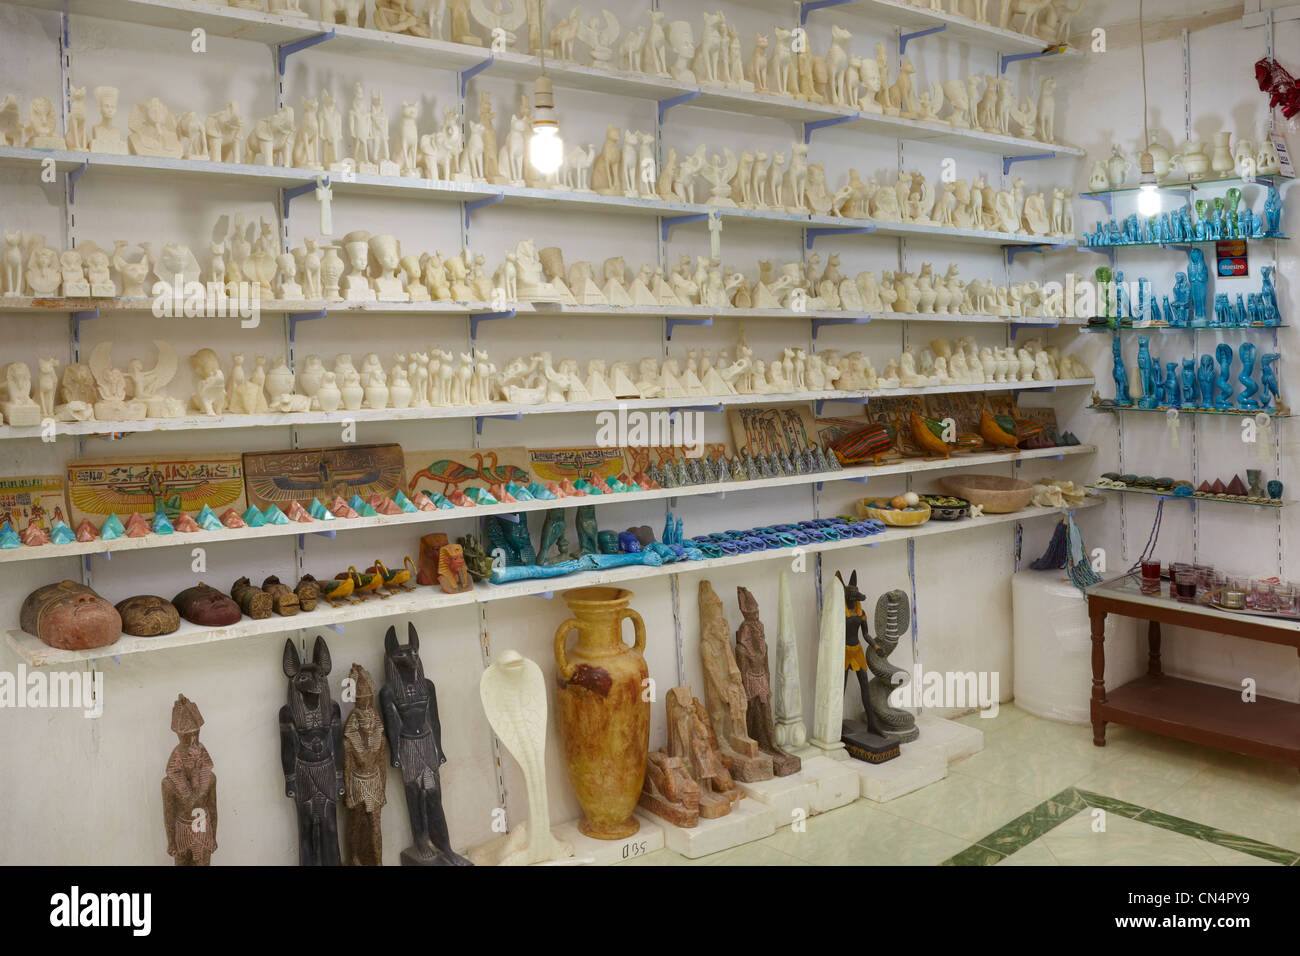 Egypt - shop with alabaster and basaltic souvenirs, Aswan, Egypt Stock Photo